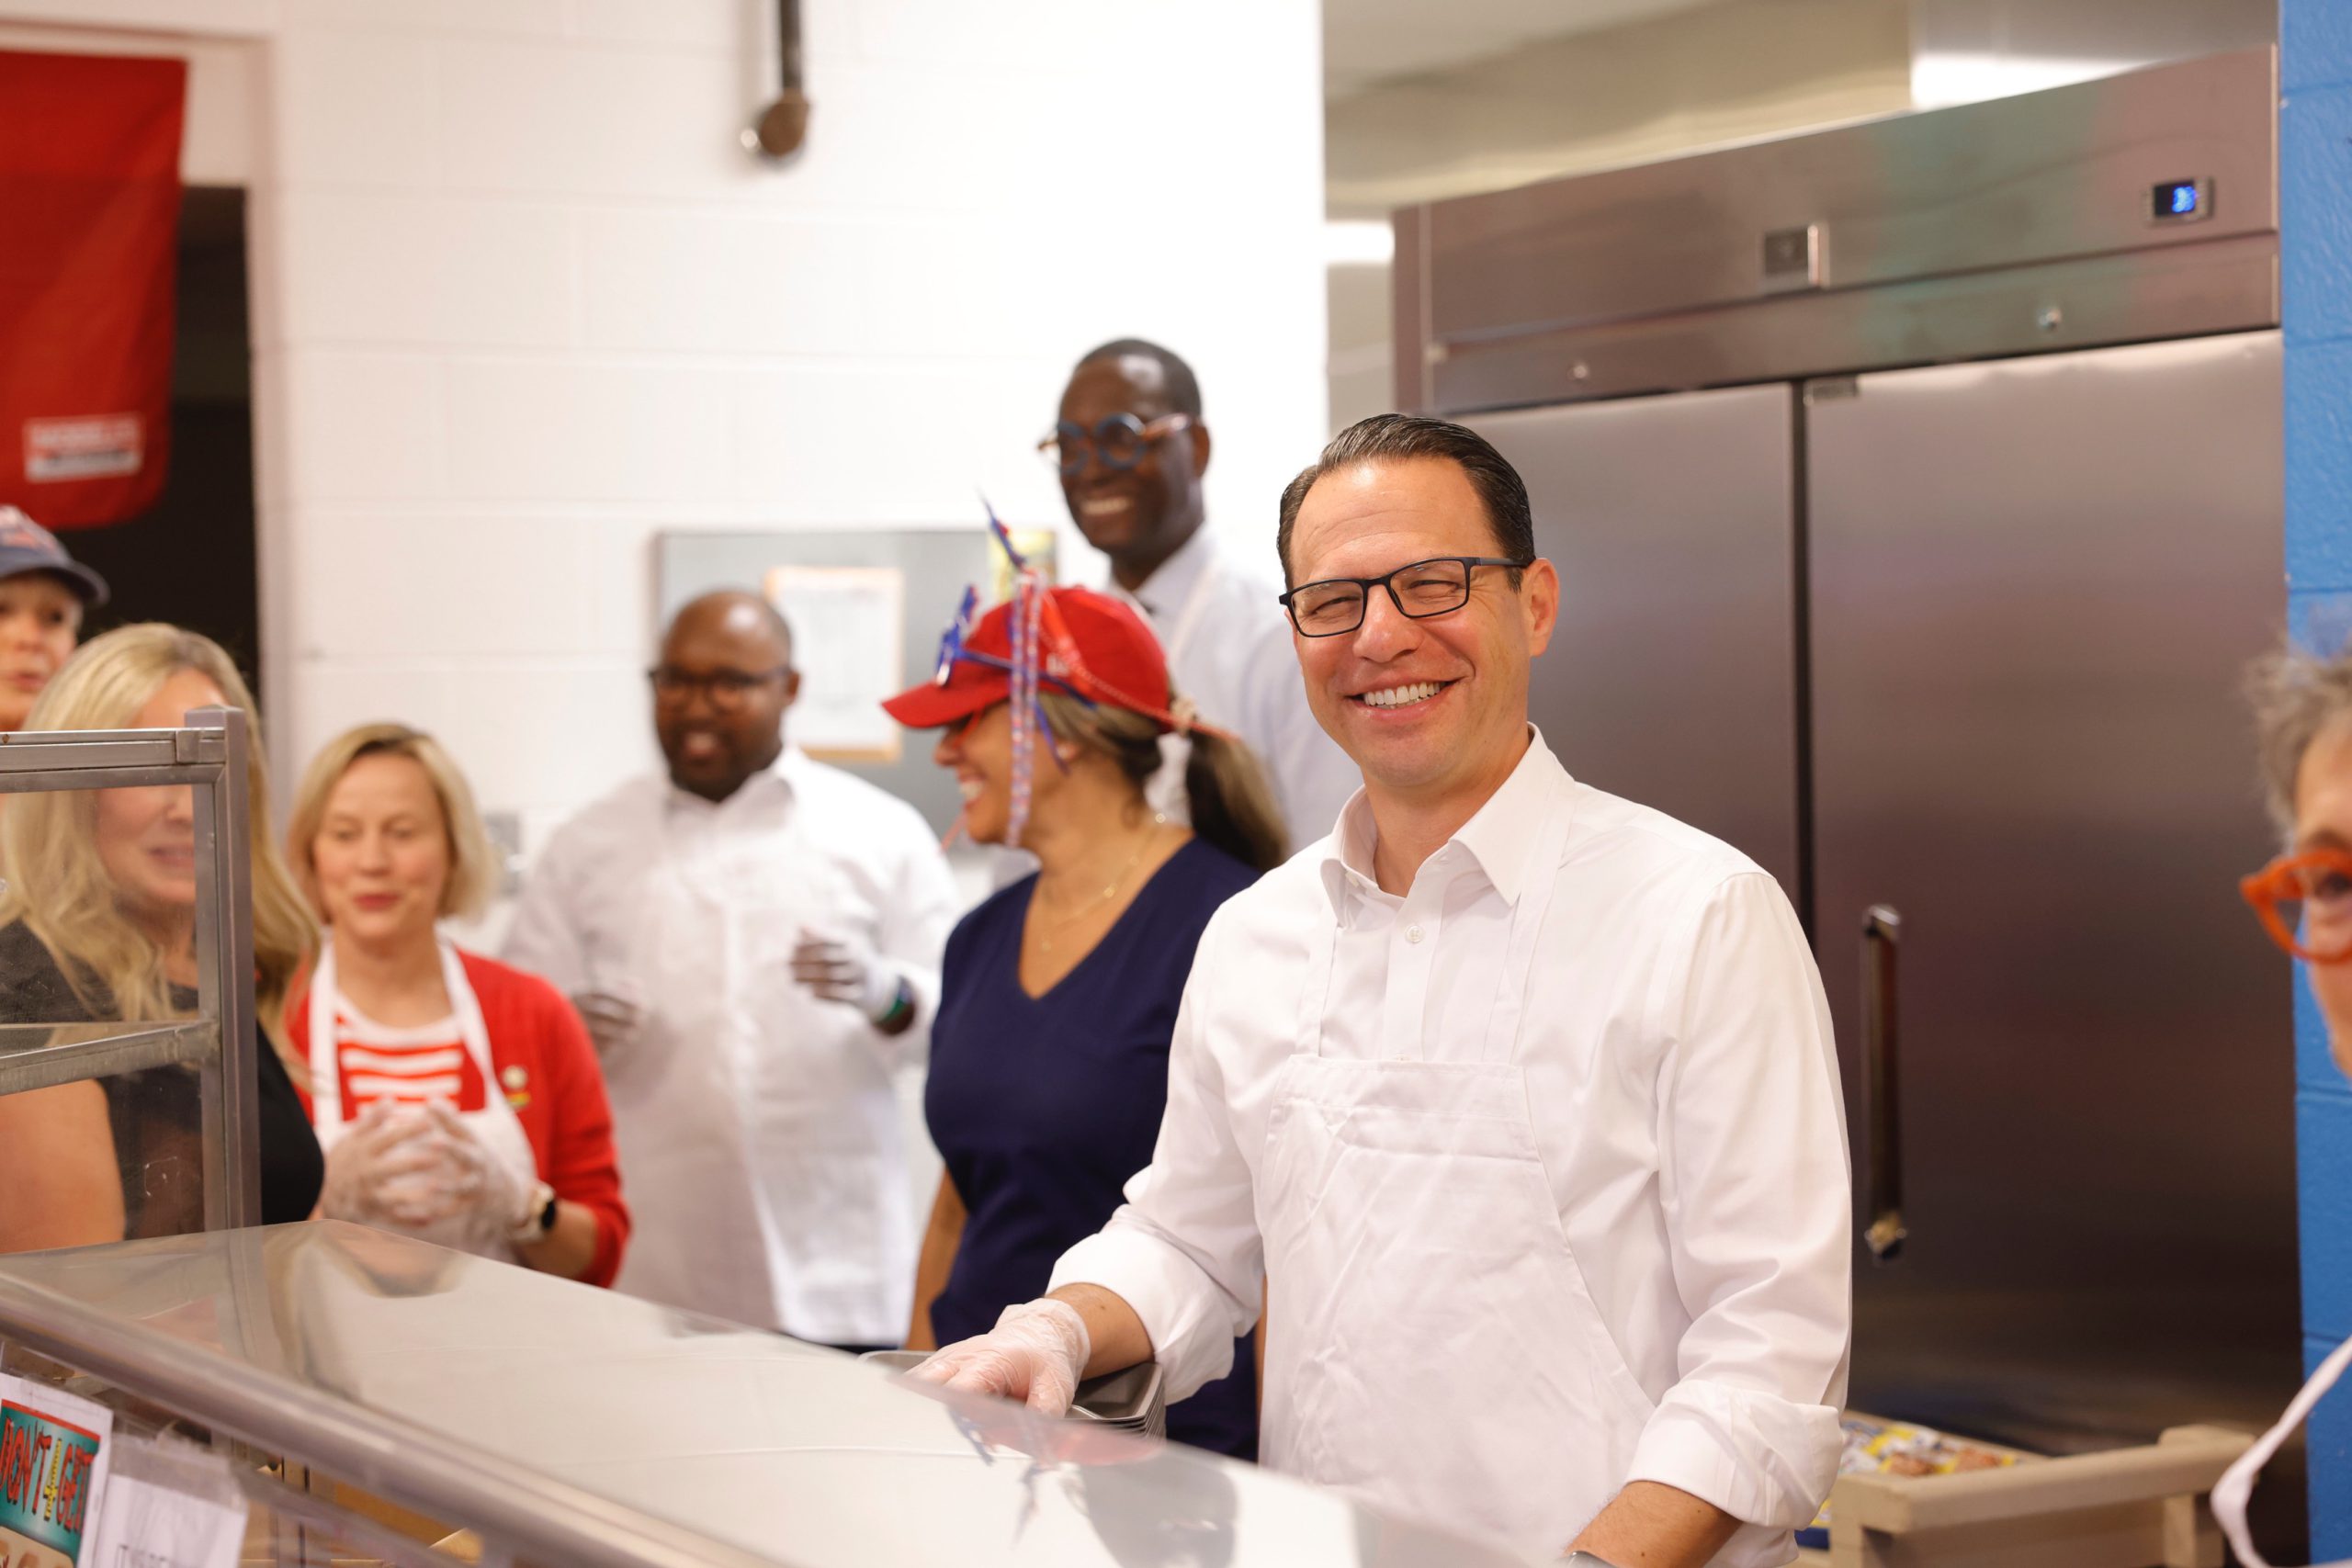 Governor Shapiro serves students at a Montgomery County elementary school where he highlighted his budget proposal's $38.5 million increase to provide universal free breakfast for 1.7 million Pennsylvania kids